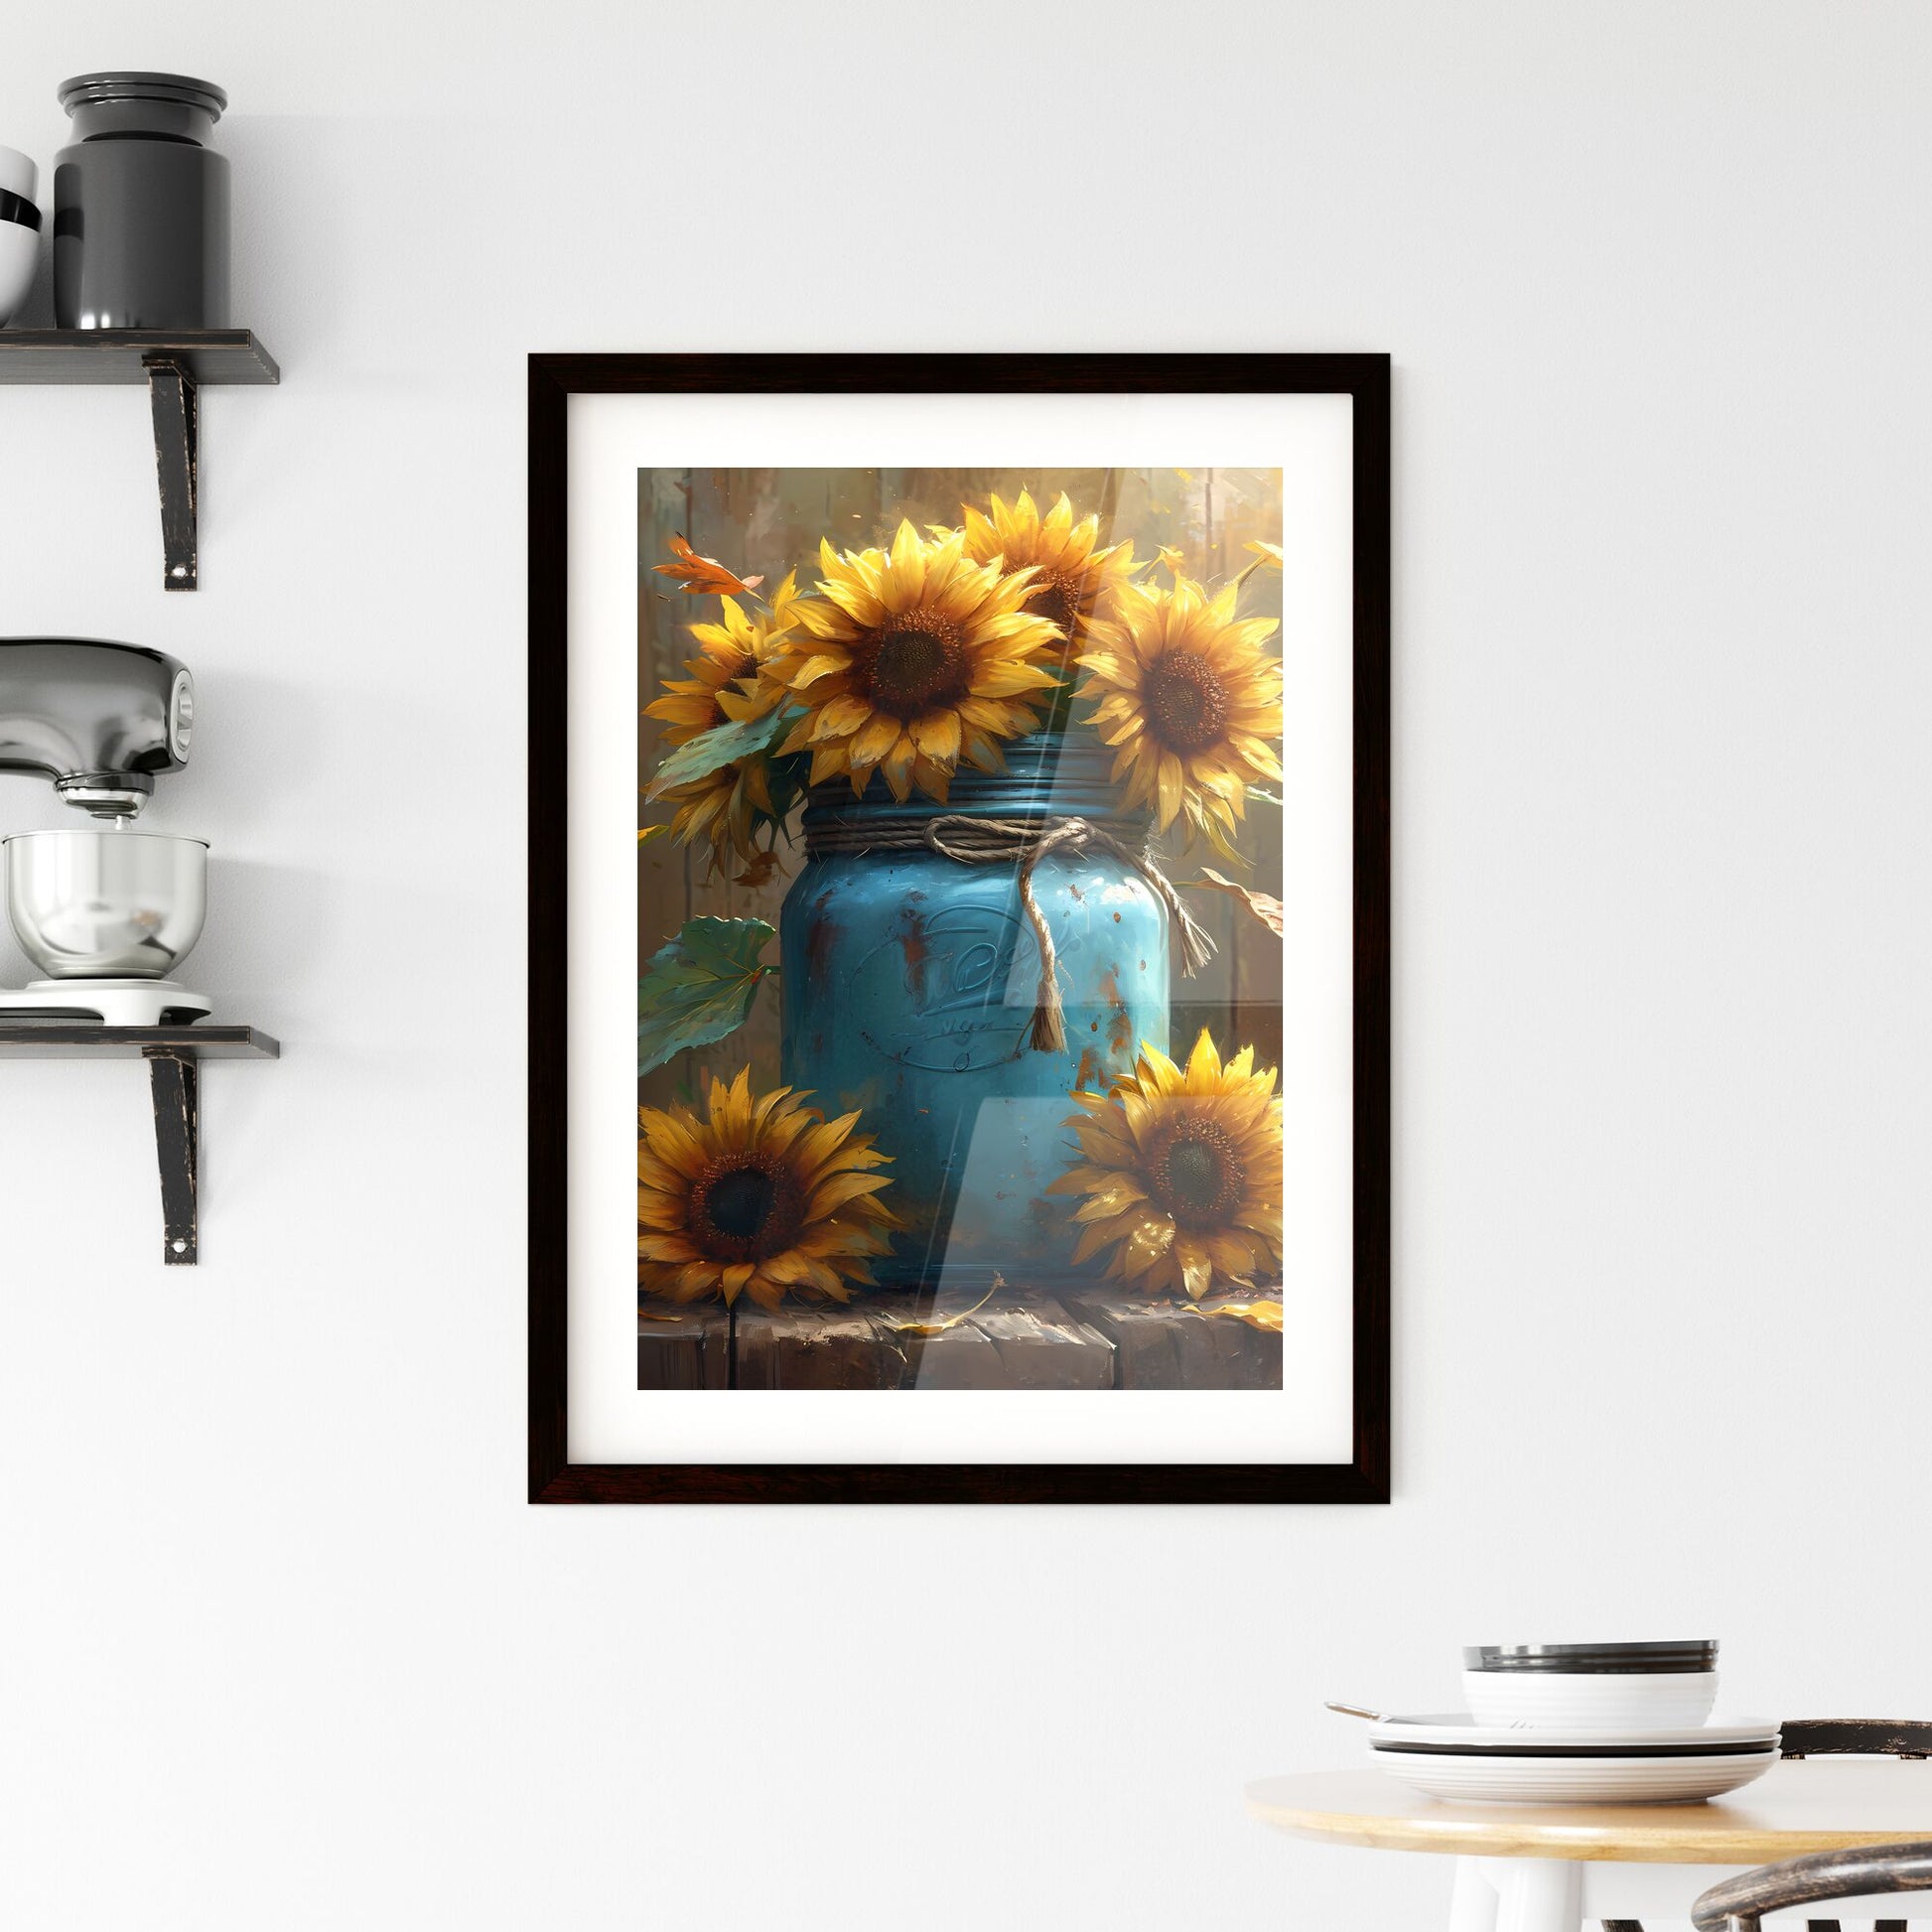 A vibrant bunch of sunflowers in a vintage jar - Art print of a blue jar with yellow flowers Default Title